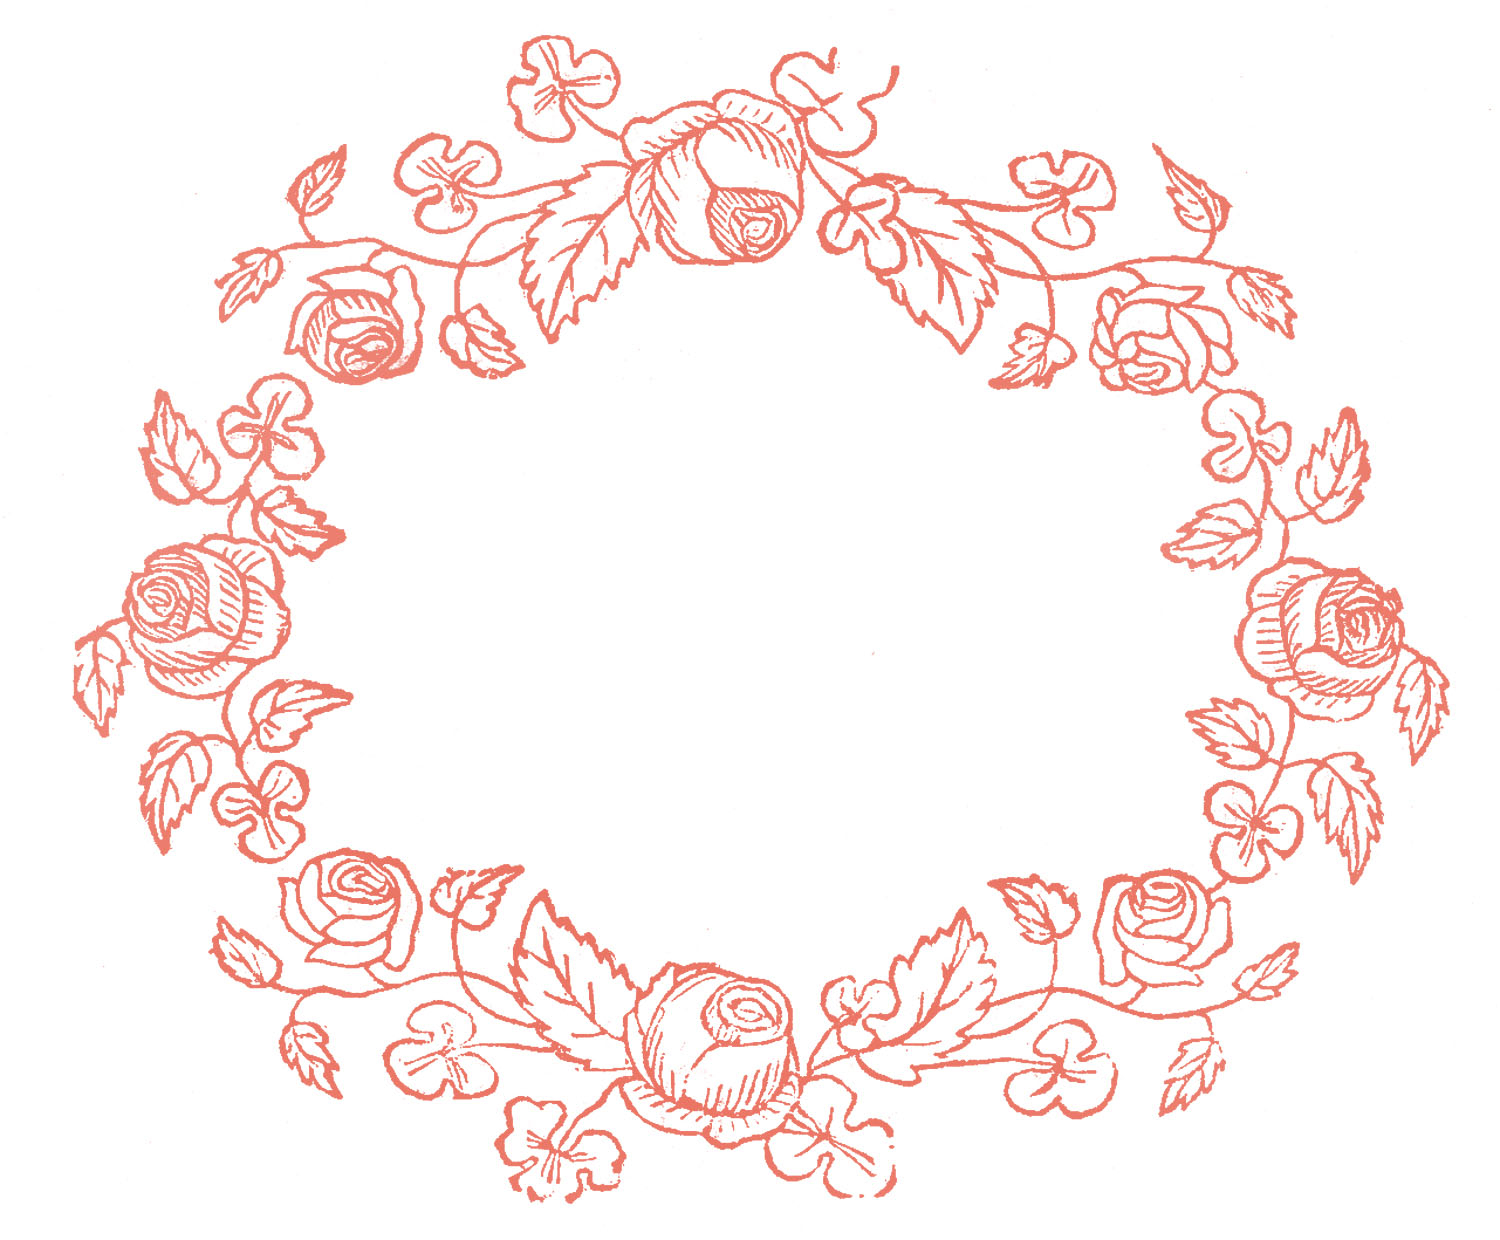 Victorian Embroidery Patterns Royalty Free Images Rose Wreaths Embroidery Pattern The